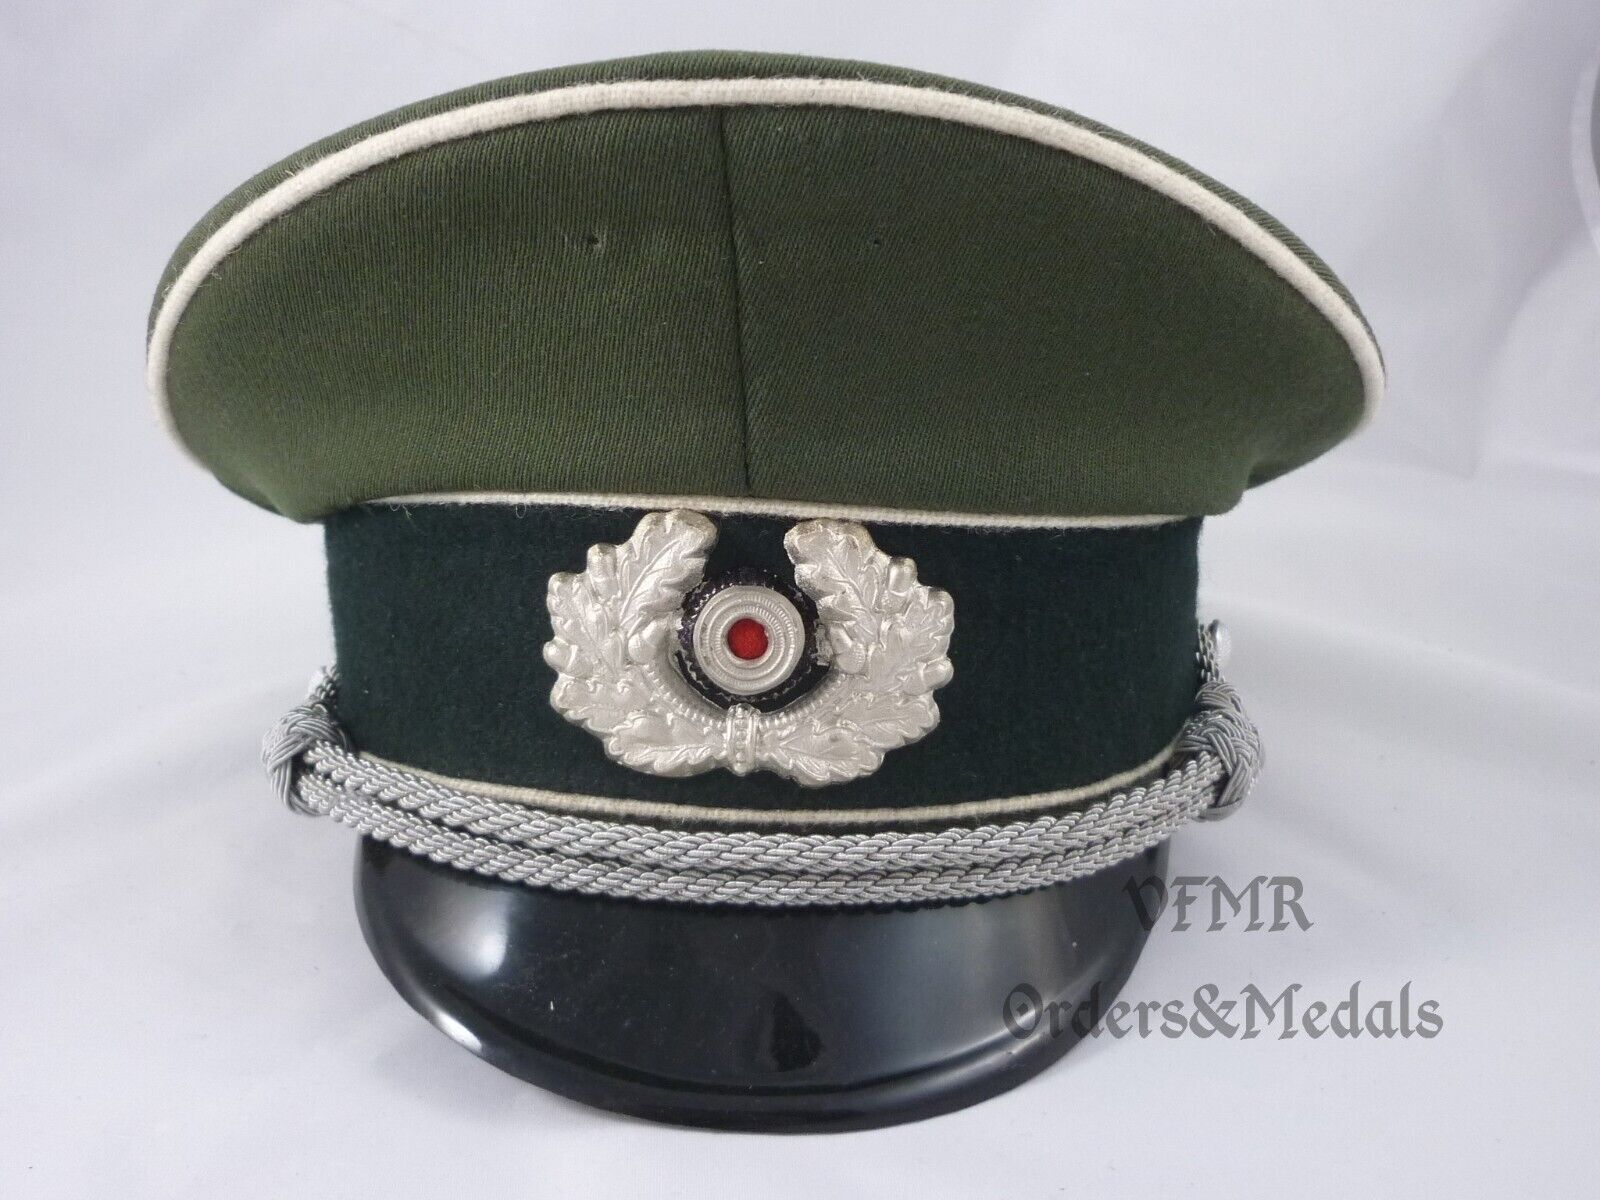 Peaked cap for officers of the Wehrmacht 2nd Infantry. World War